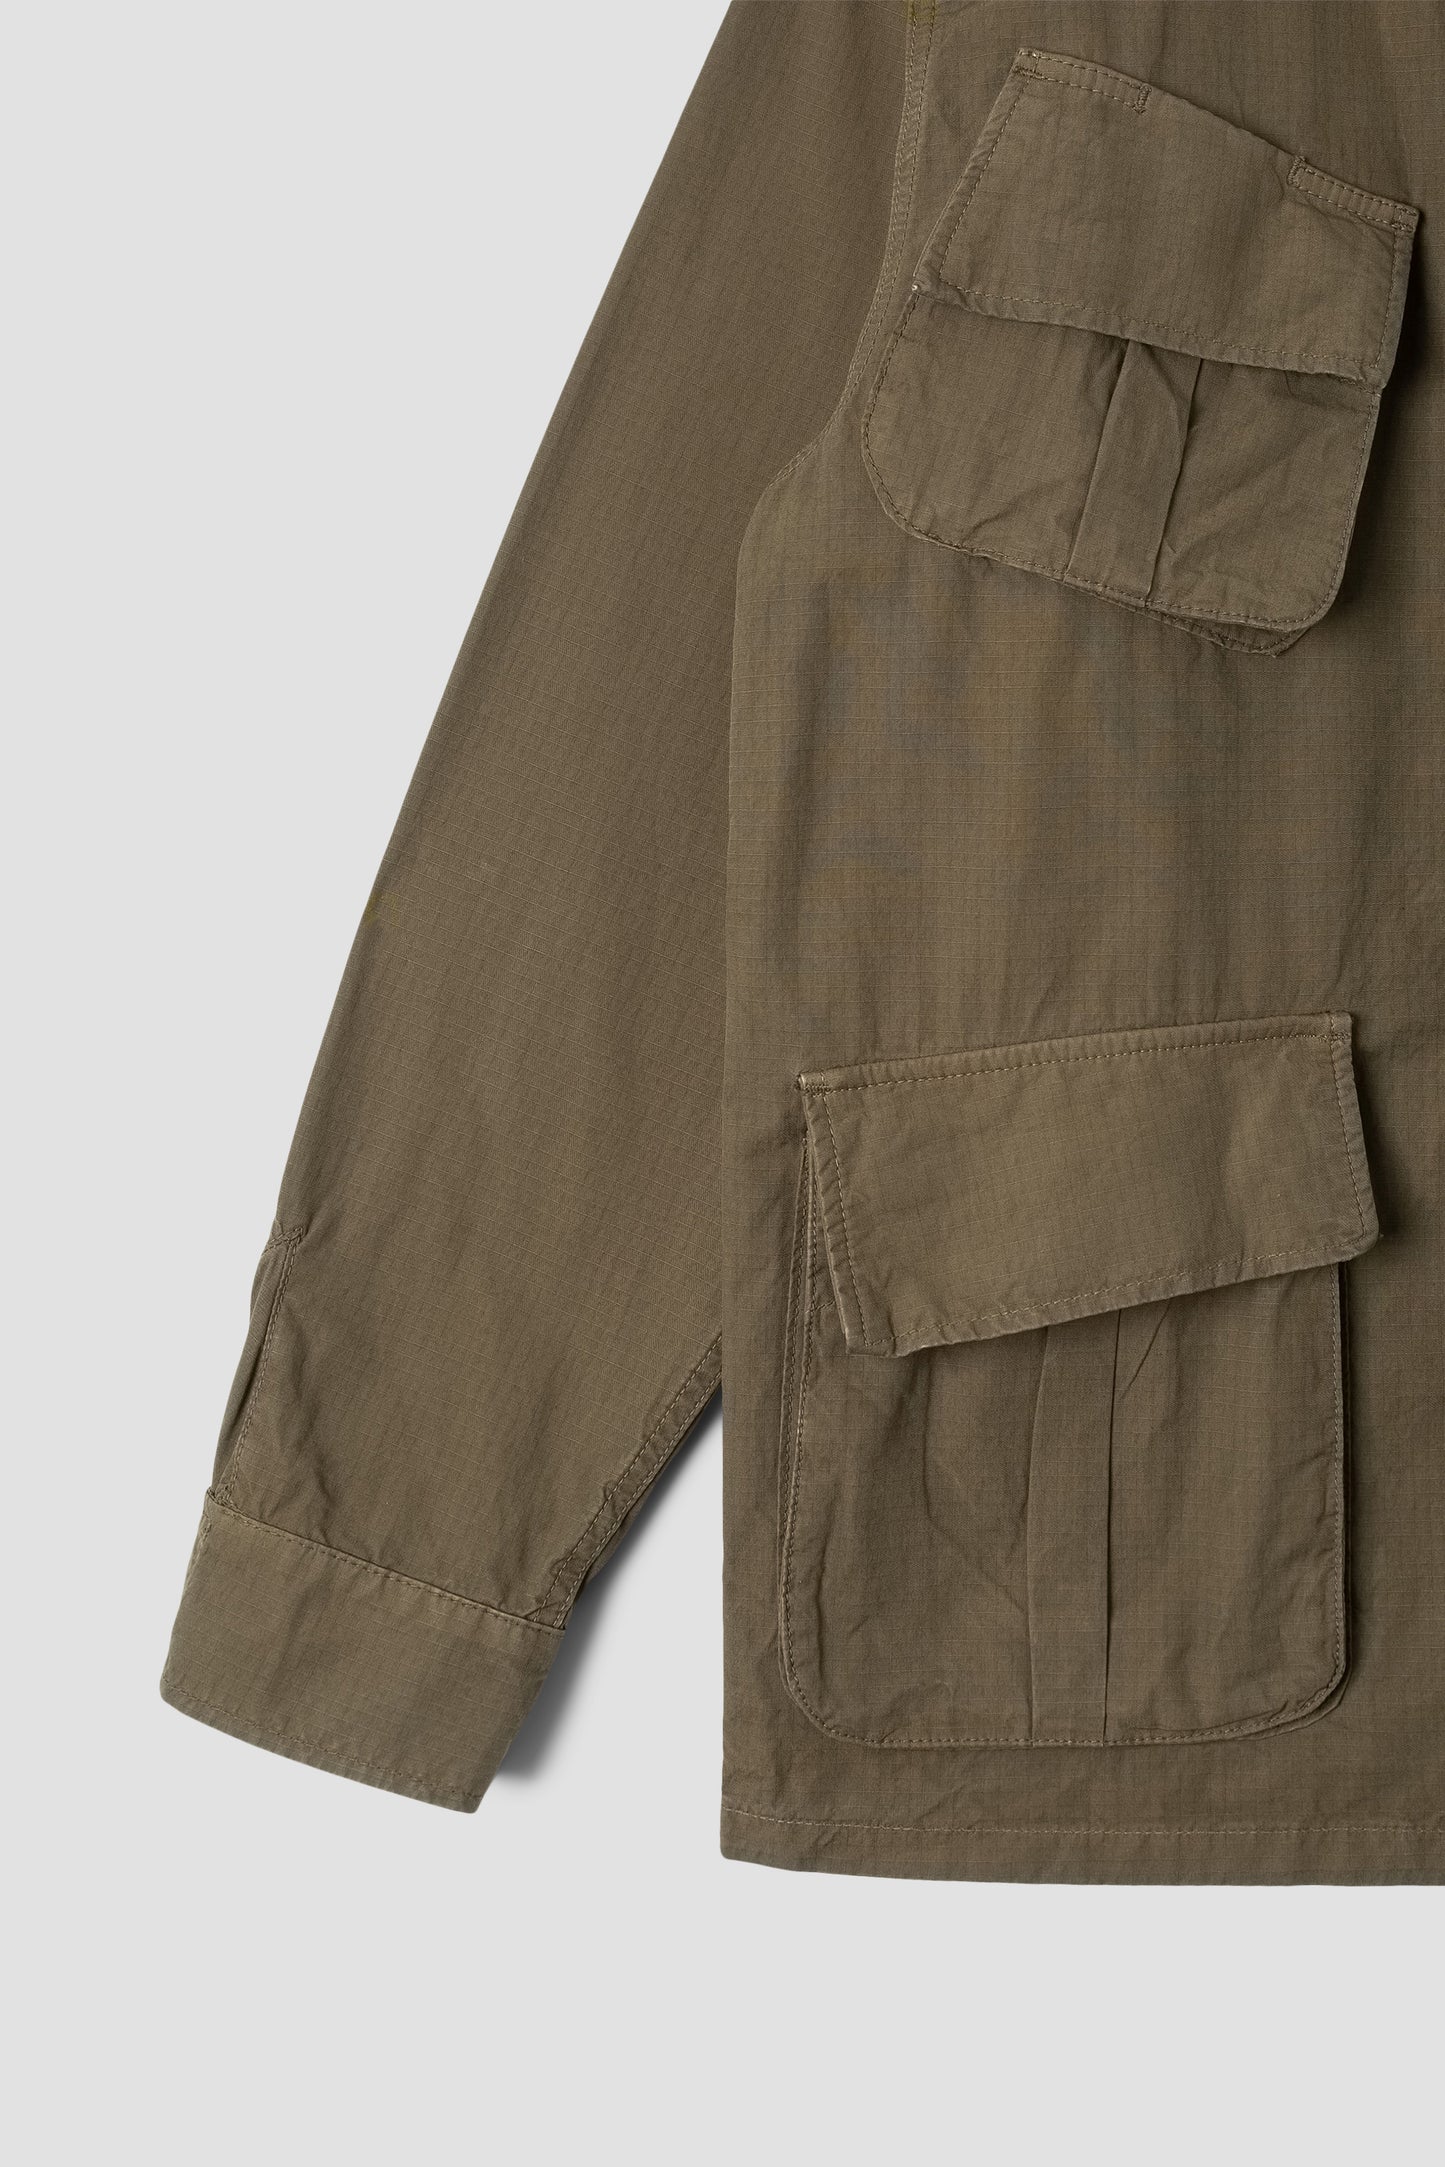 Tropical Jacket (Olive Ripstop)